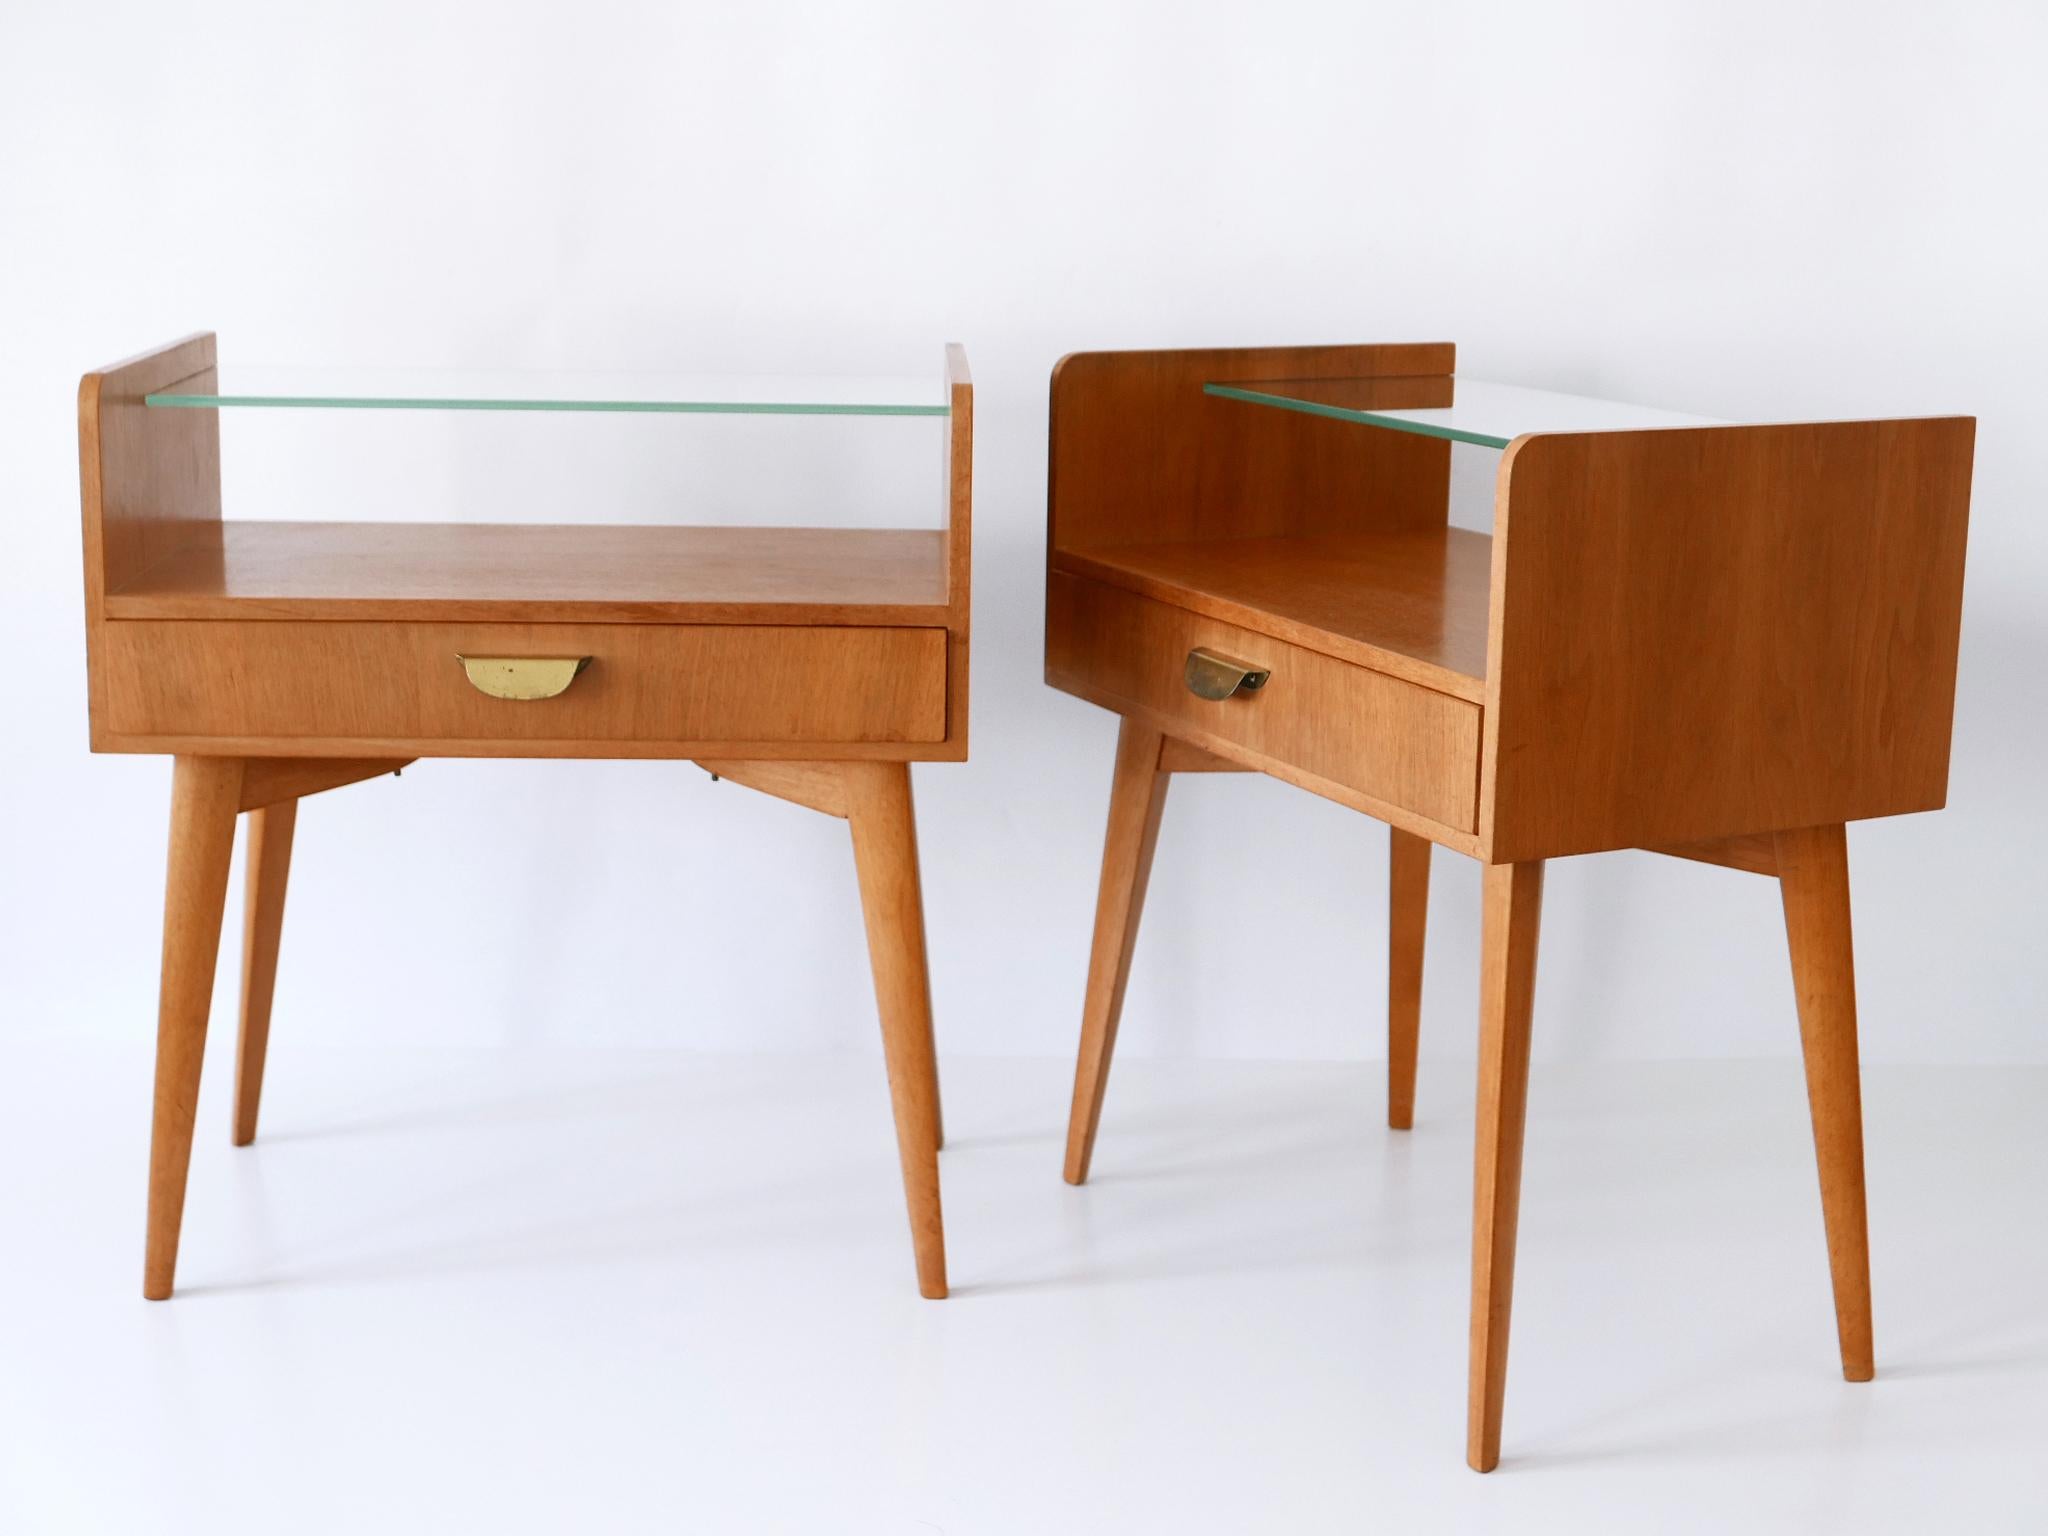 Mid-20th Century Set of Two Mid Century Modern Walnut Nightstands by WK Möbel Germany 1950s For Sale